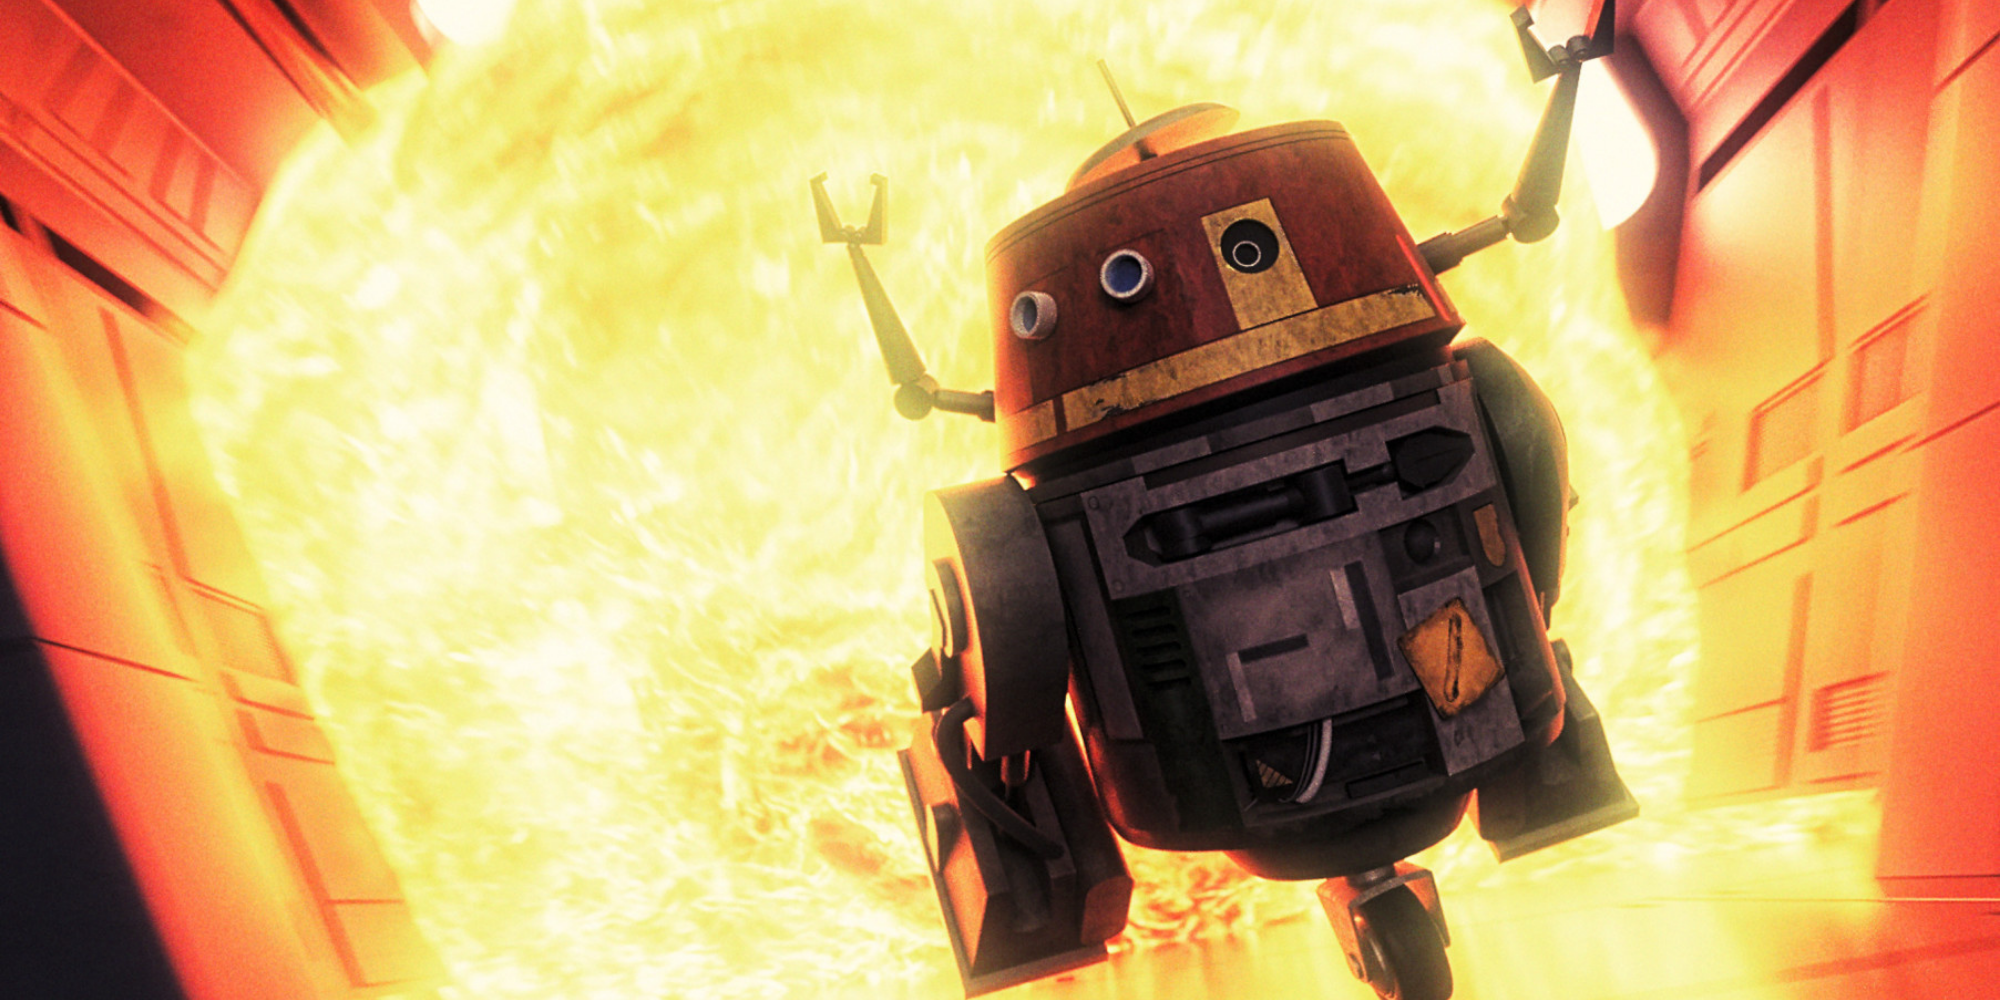 Star Wars: Chopper Is the Only Chaotic Good Character in the Franchise